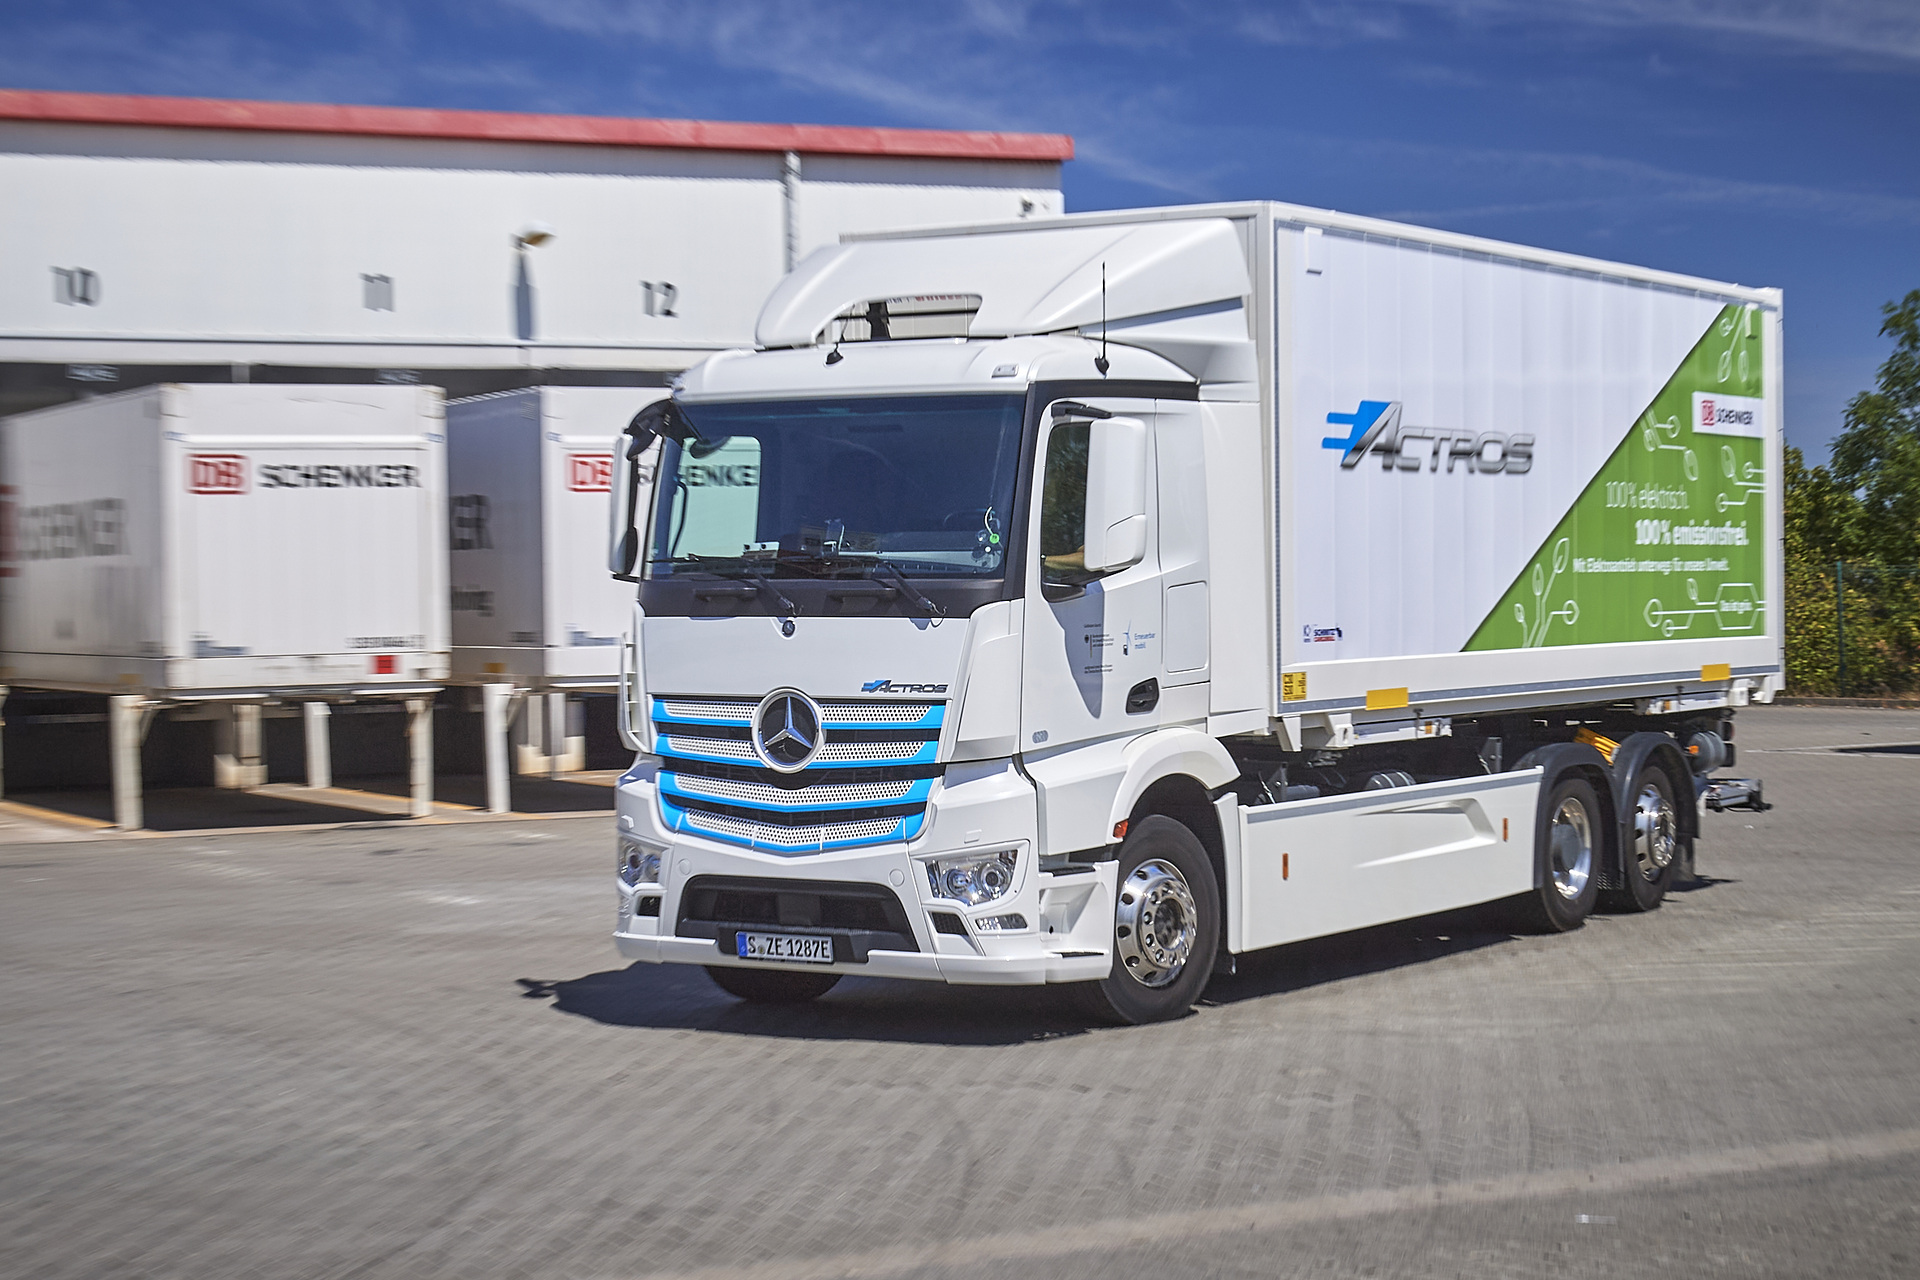 Locally CO2-neutral distribution transport for Leipzig: DB Schenker counts on the  Mercedes-Benz eActros